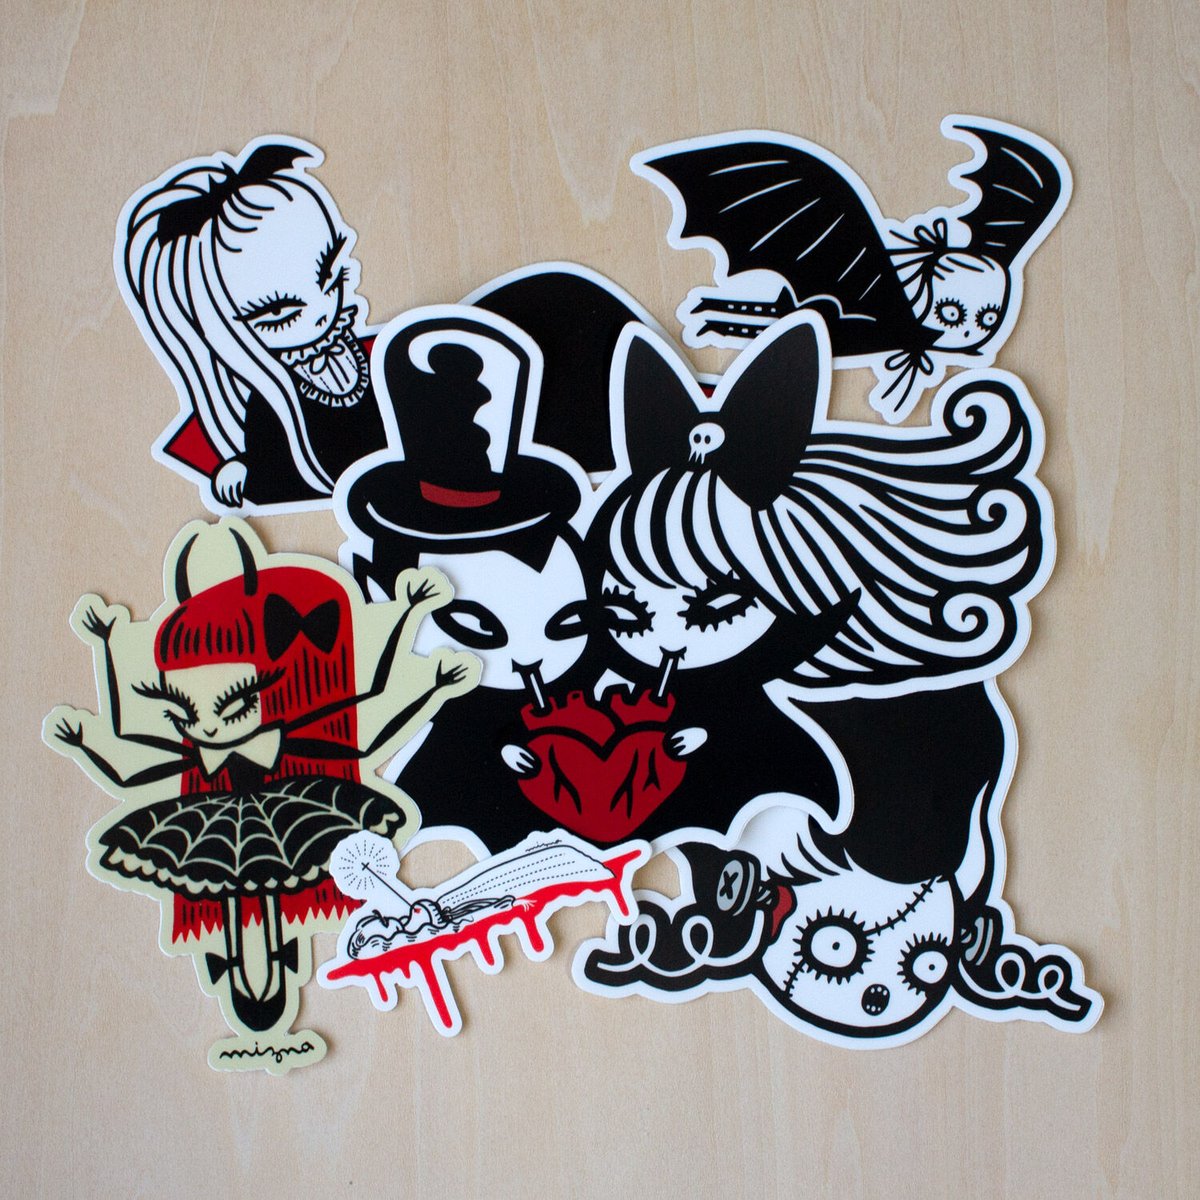 Mizna x Martian Toys Complete Sticker pack ステッカーセット